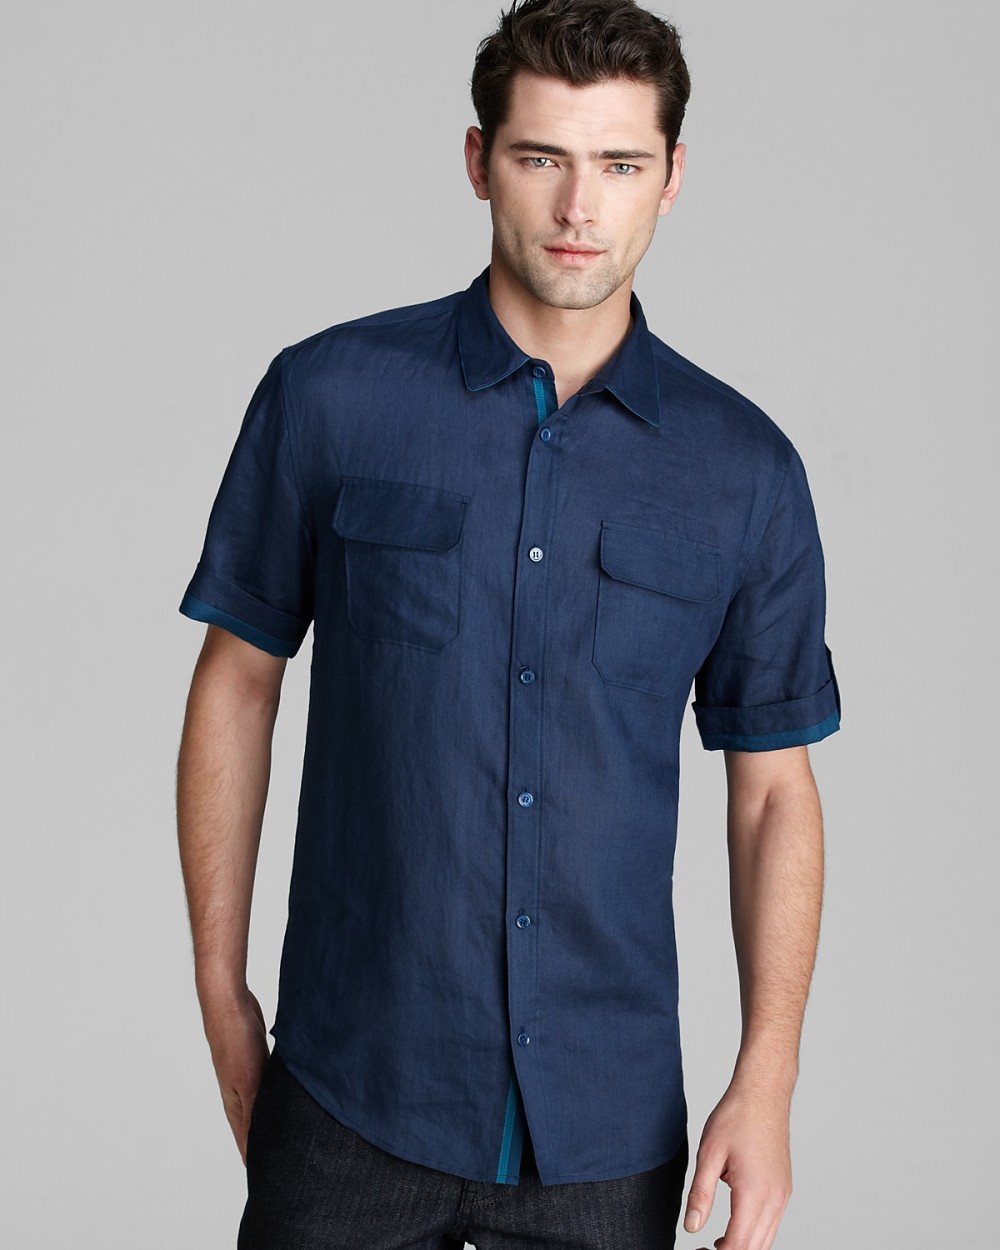 Sean O'Pry Sports Elie Tahari's Summer Collection for Bloomingdale's ...